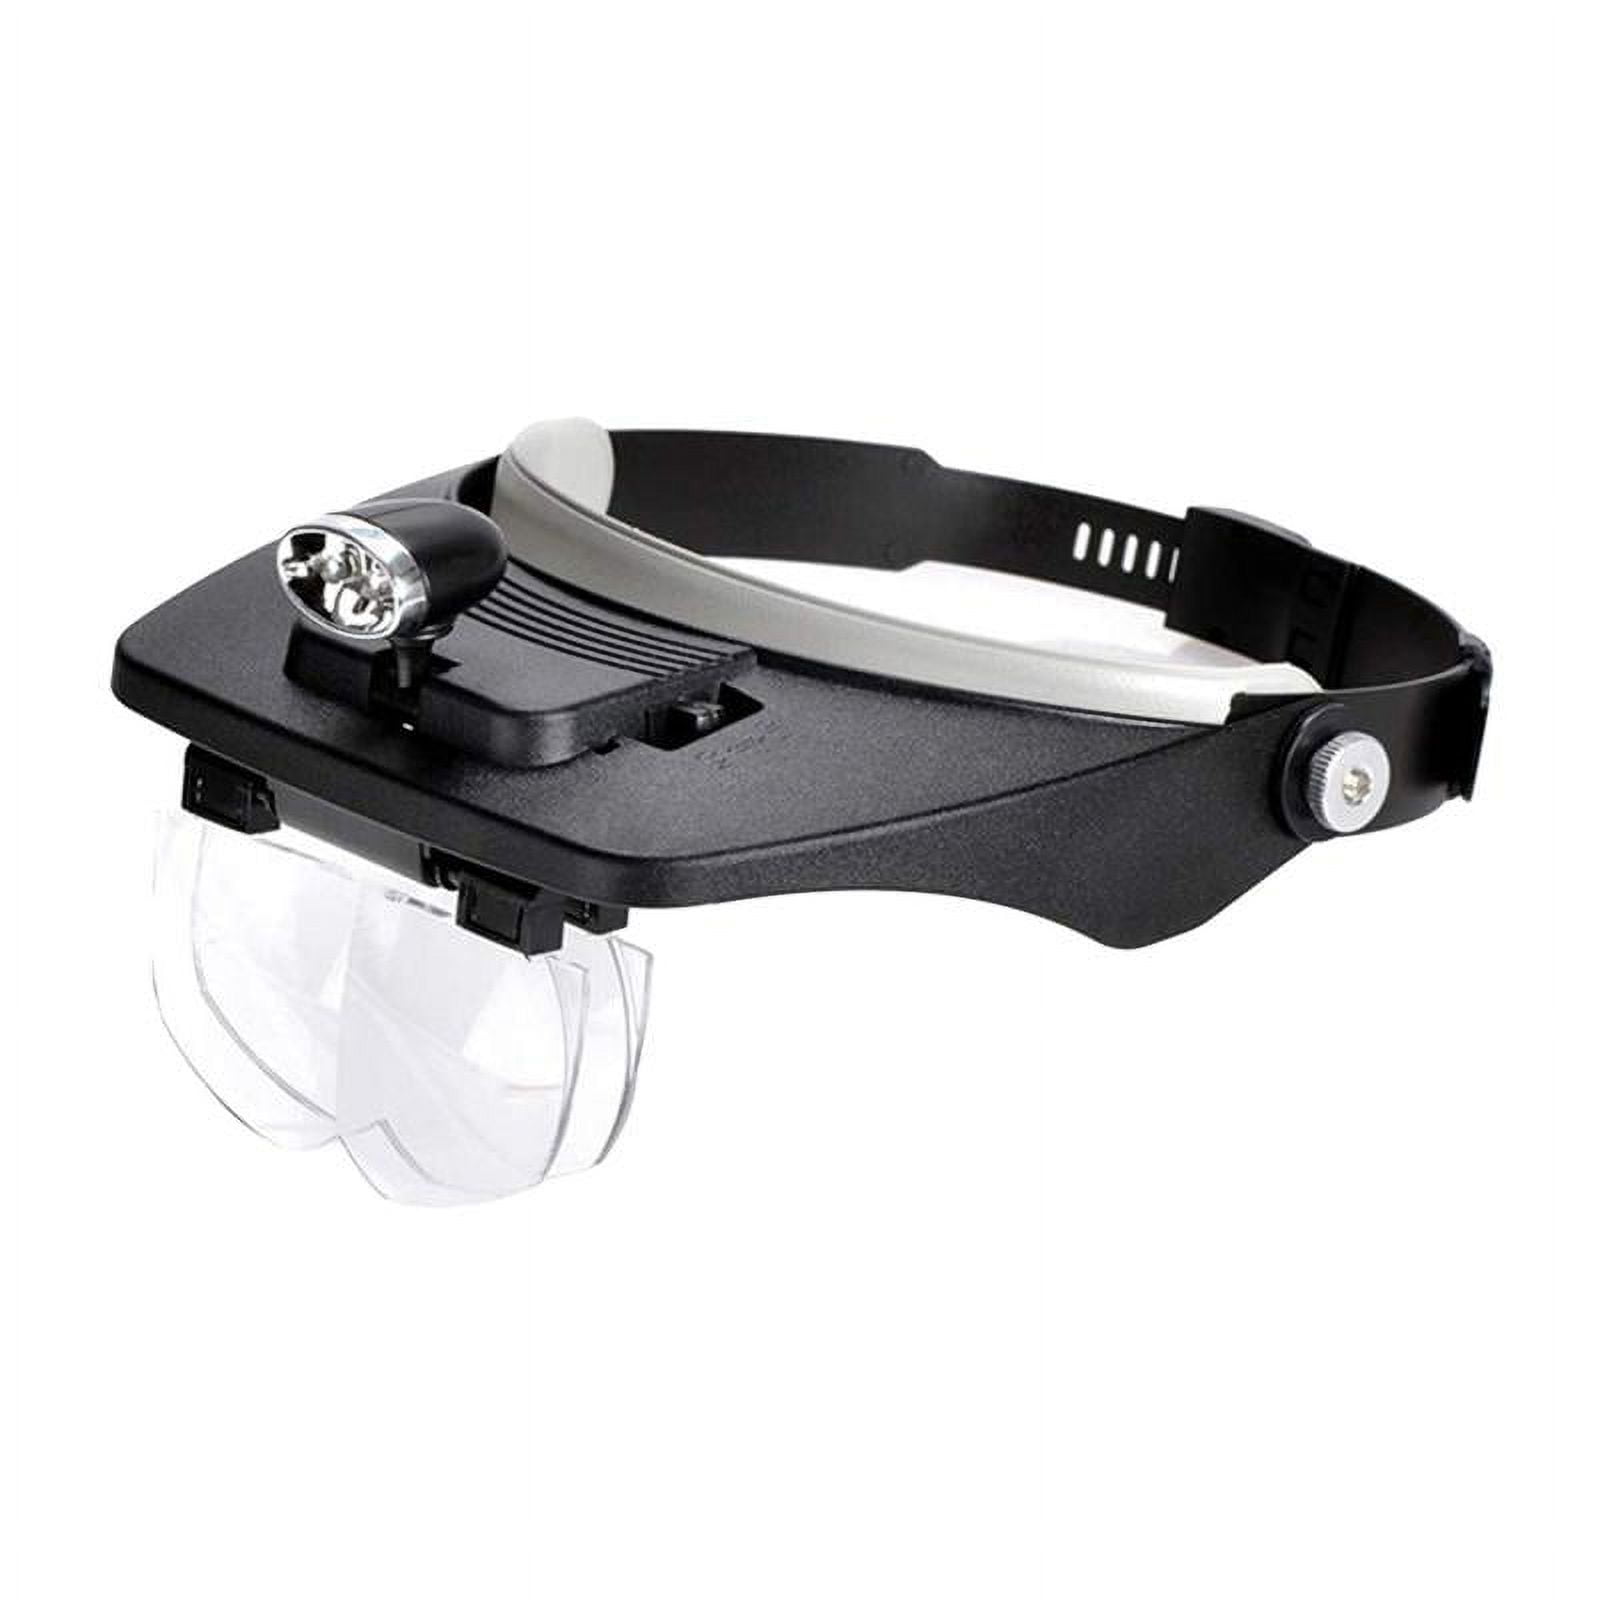 LED Magnifying Glasses w/ 1.6X Magnification - Bright Lighted Eyeglass  Lights, USB Rechargeable, Lightweight & Durable - LED Eyewear Enhances Your  Vision for Reading, DIY, Crafts & Detailed Work 